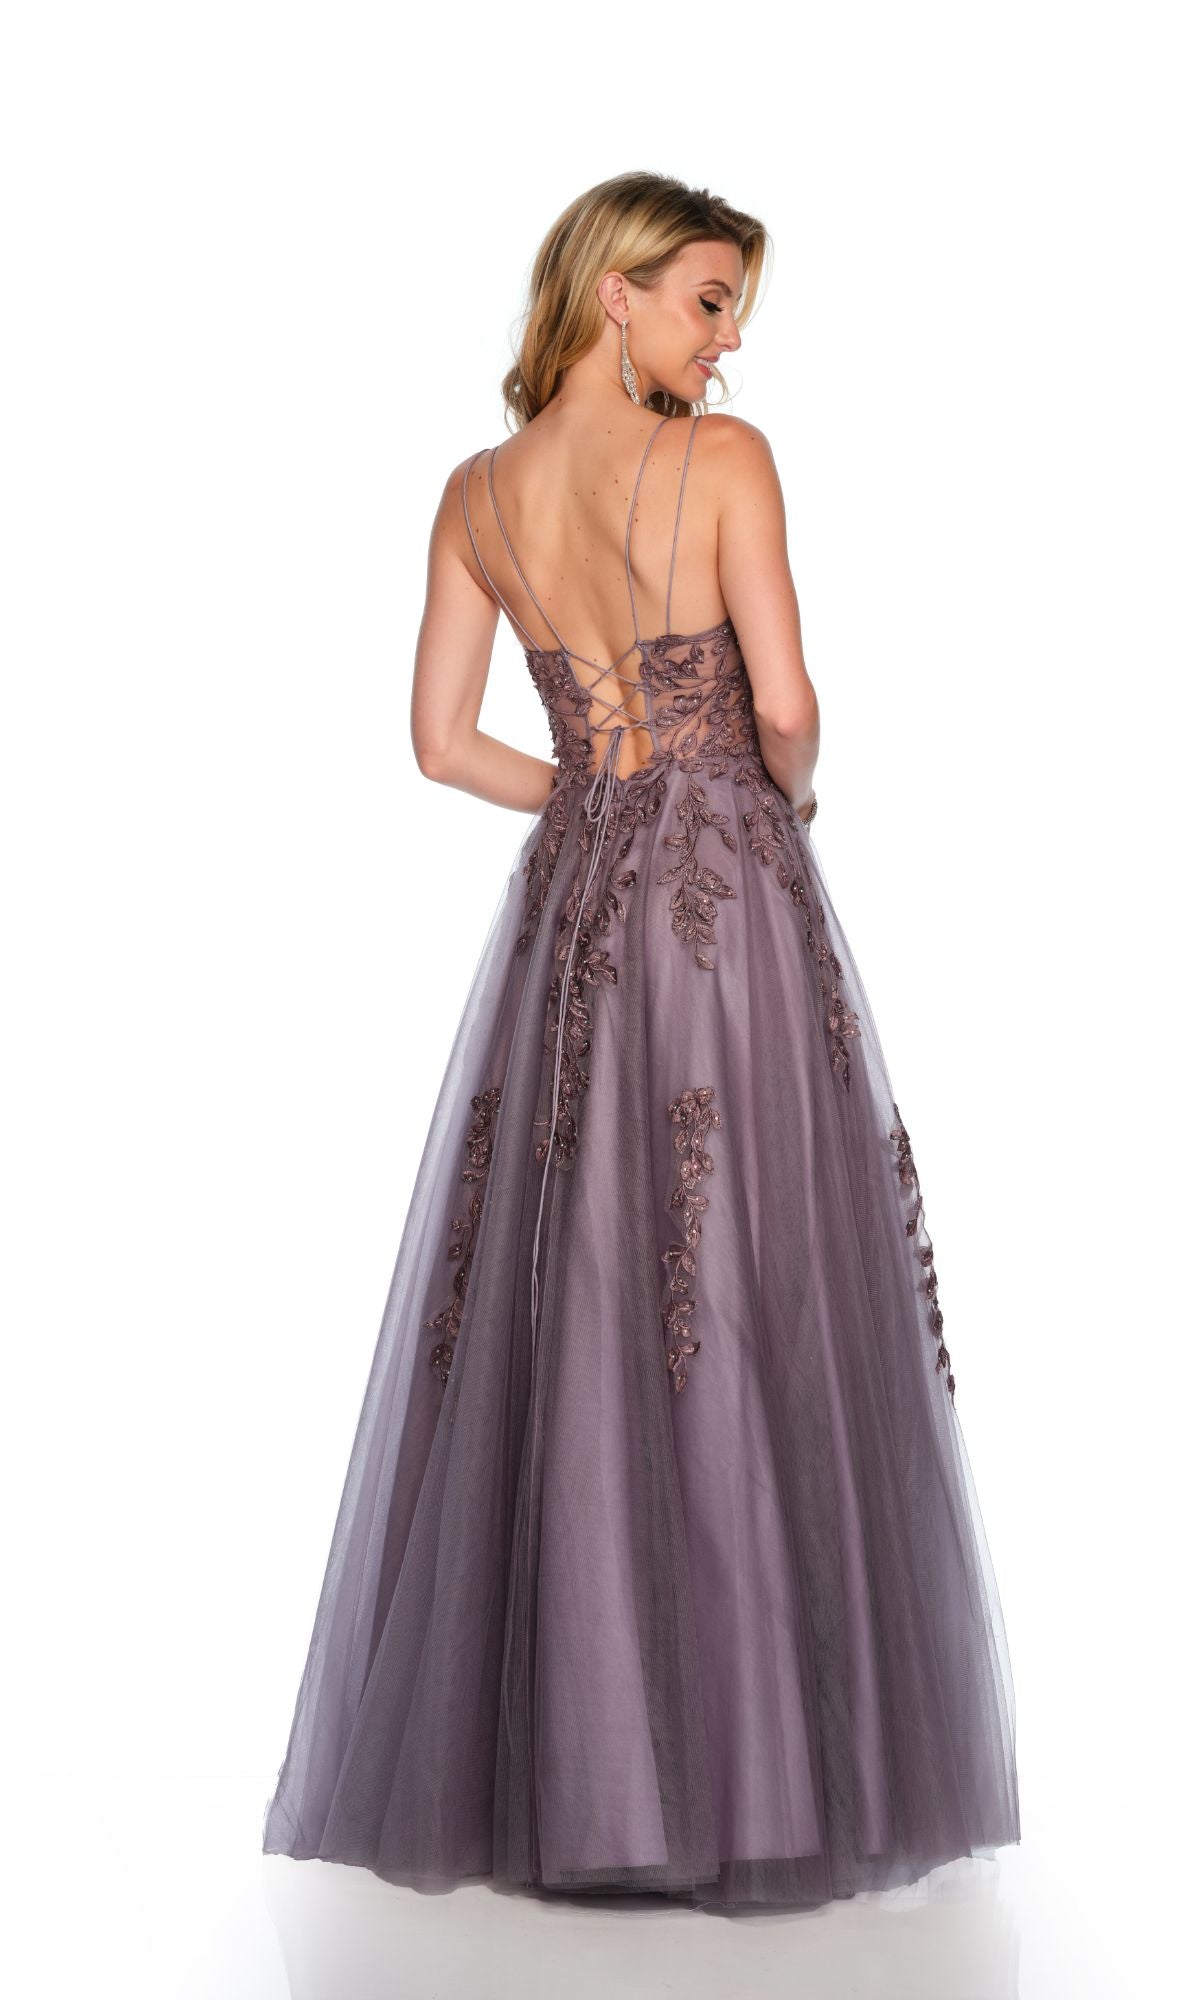 Long Formal Dress 11653 by Dave and Johnny